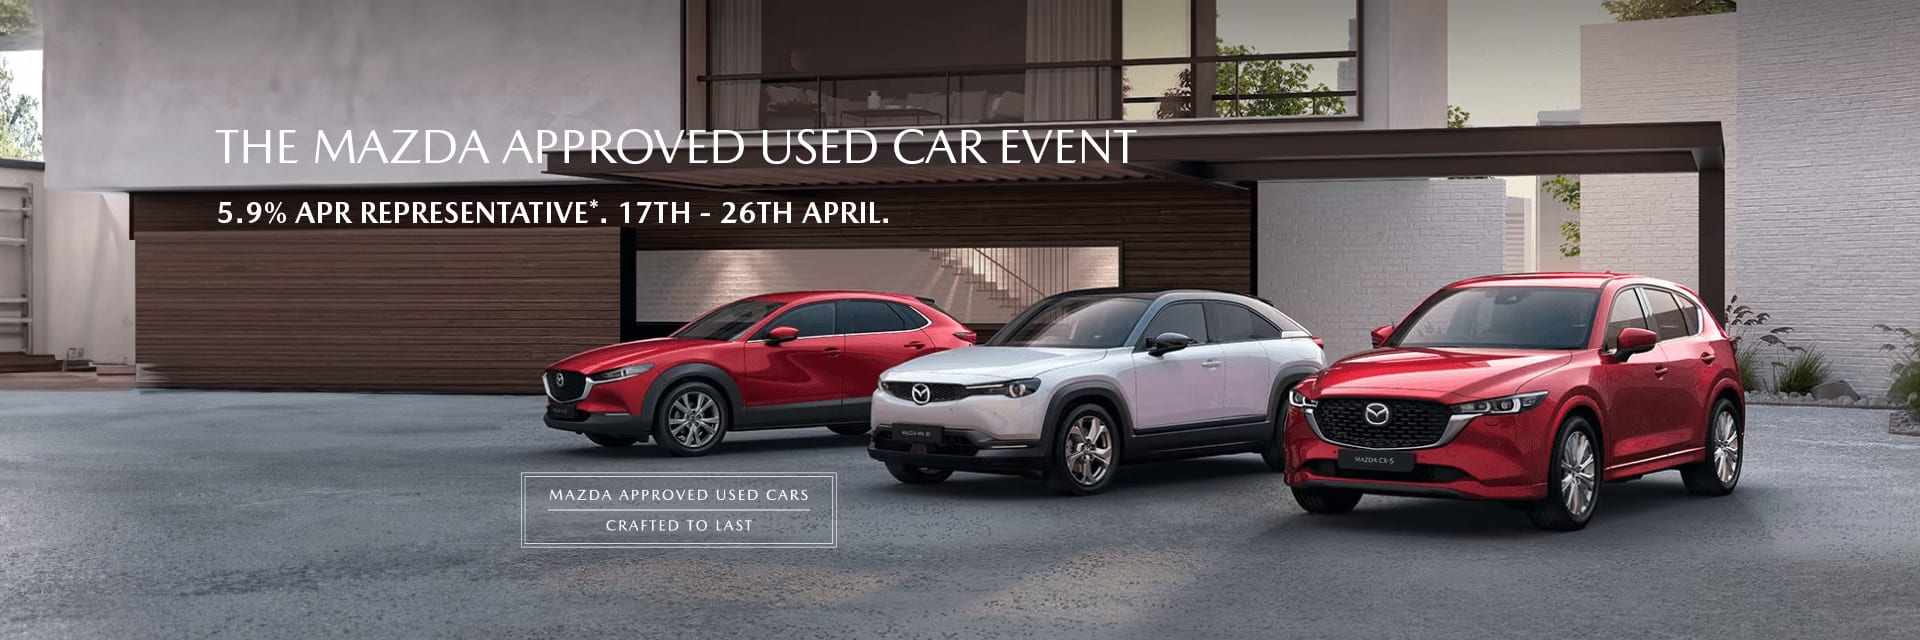 THE MAZDA AP­PROVED USED CAR EVENT